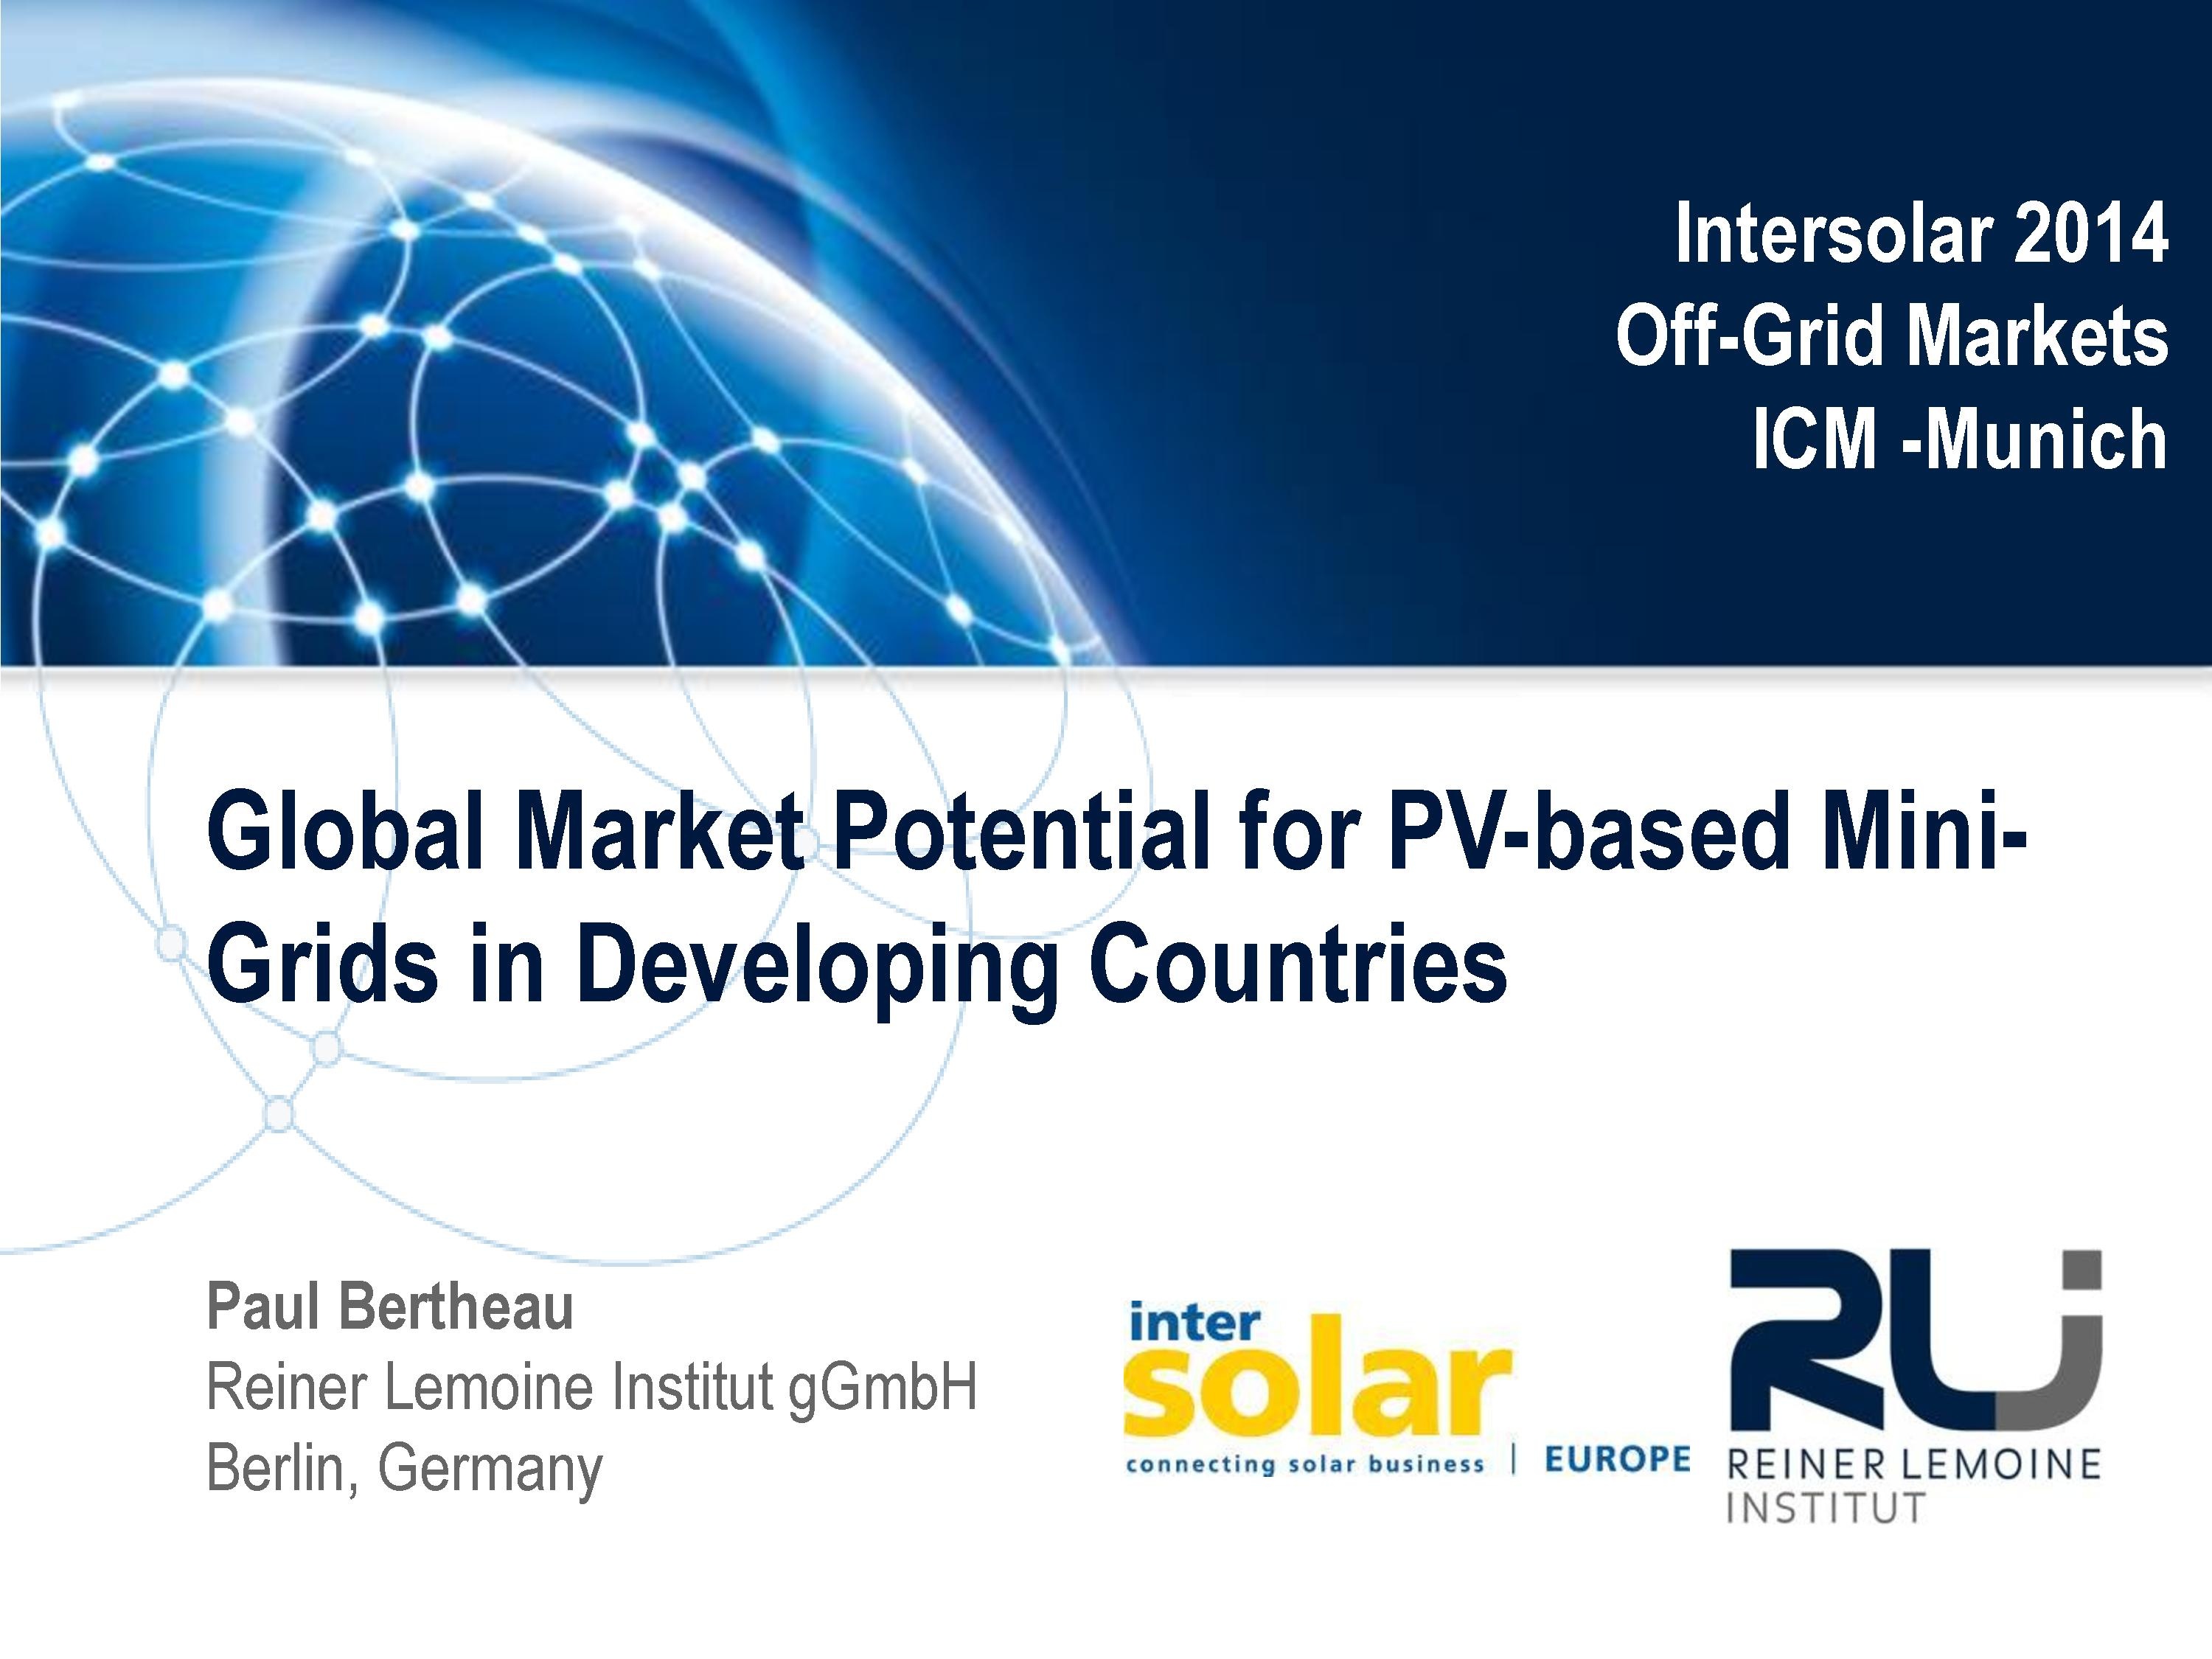 Global Market Potential for PV-based Mini-Grids in Developing Countries